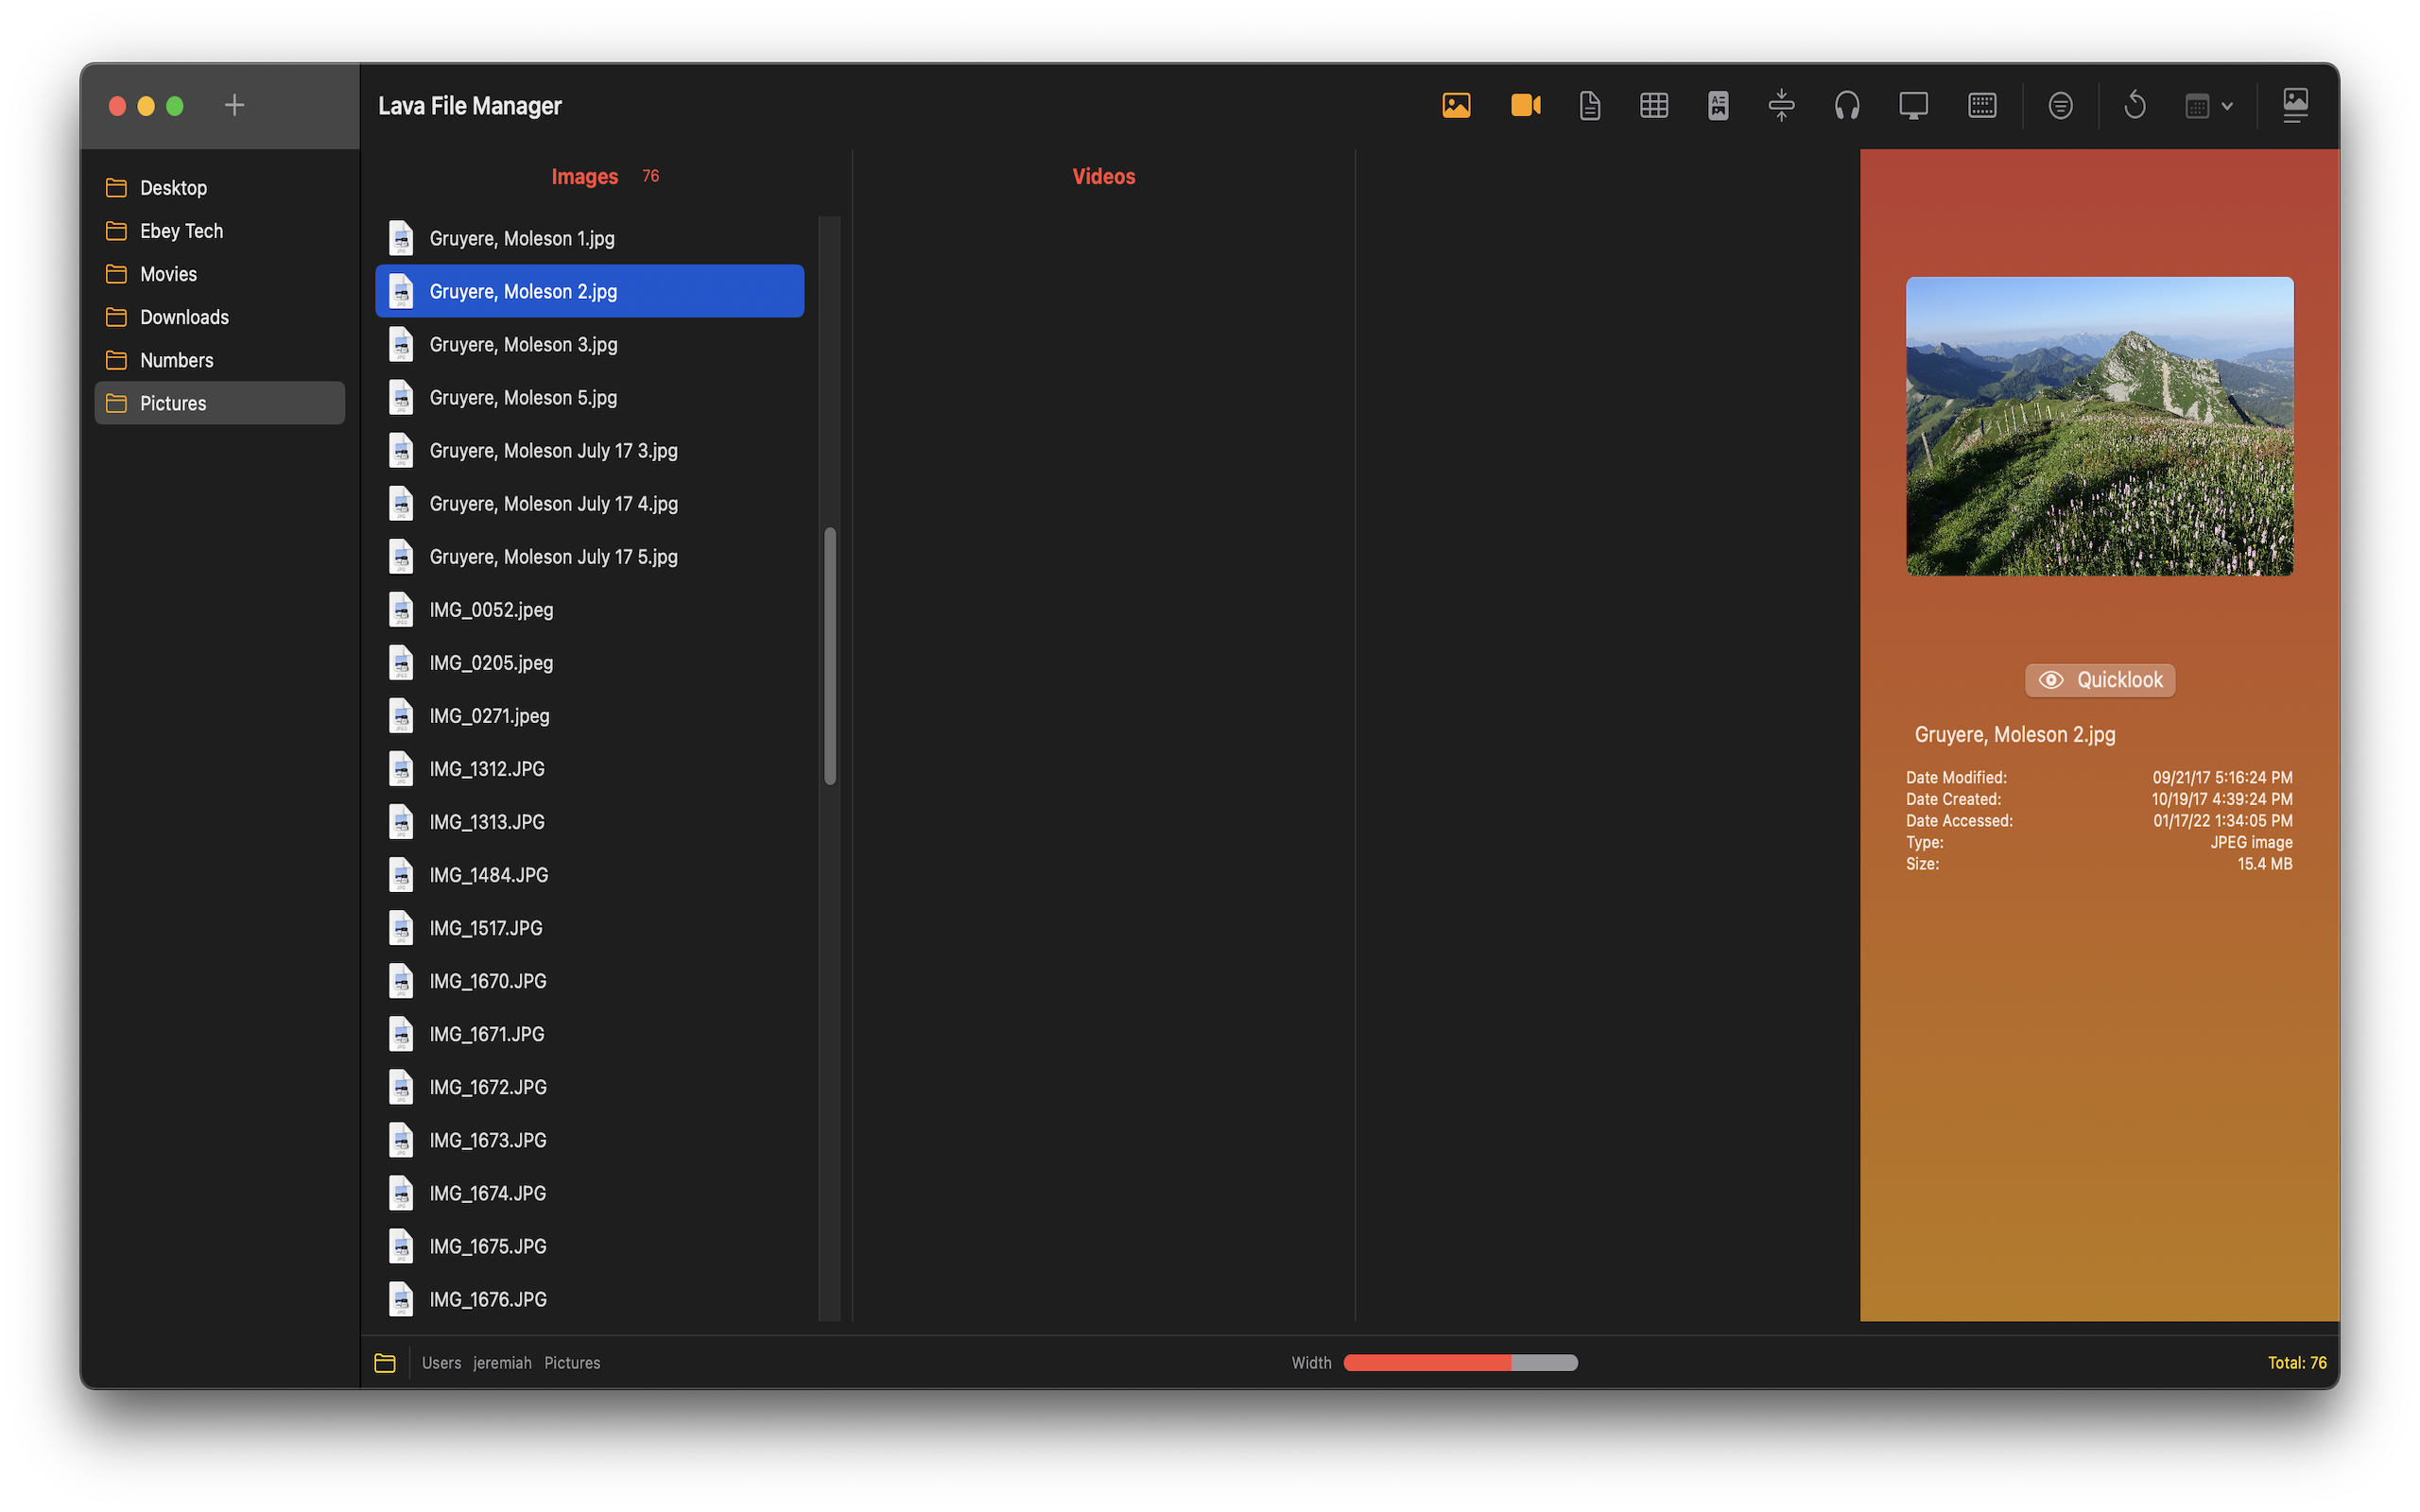 Lava File Manager for macOS